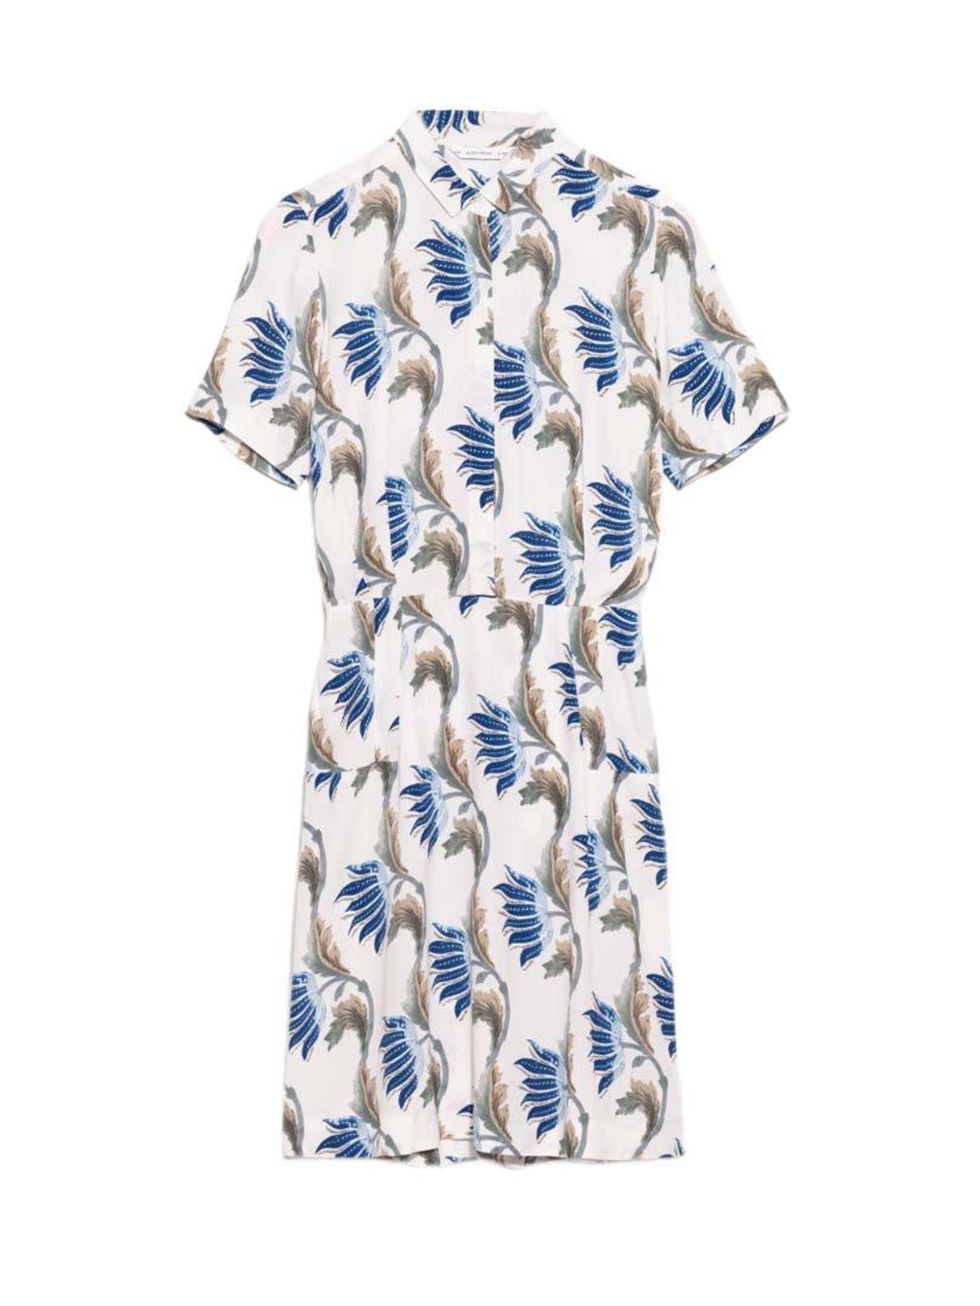 <p>Just add a pair of ballet pumps.</p>

<p><a href="http://www.stories.com/gb/New_in/Ready-to-wear/Water_Lily_Shirt_Dress/108768815-104968347.1" target="_blank">& Other Stories</a> dress, £65</p>